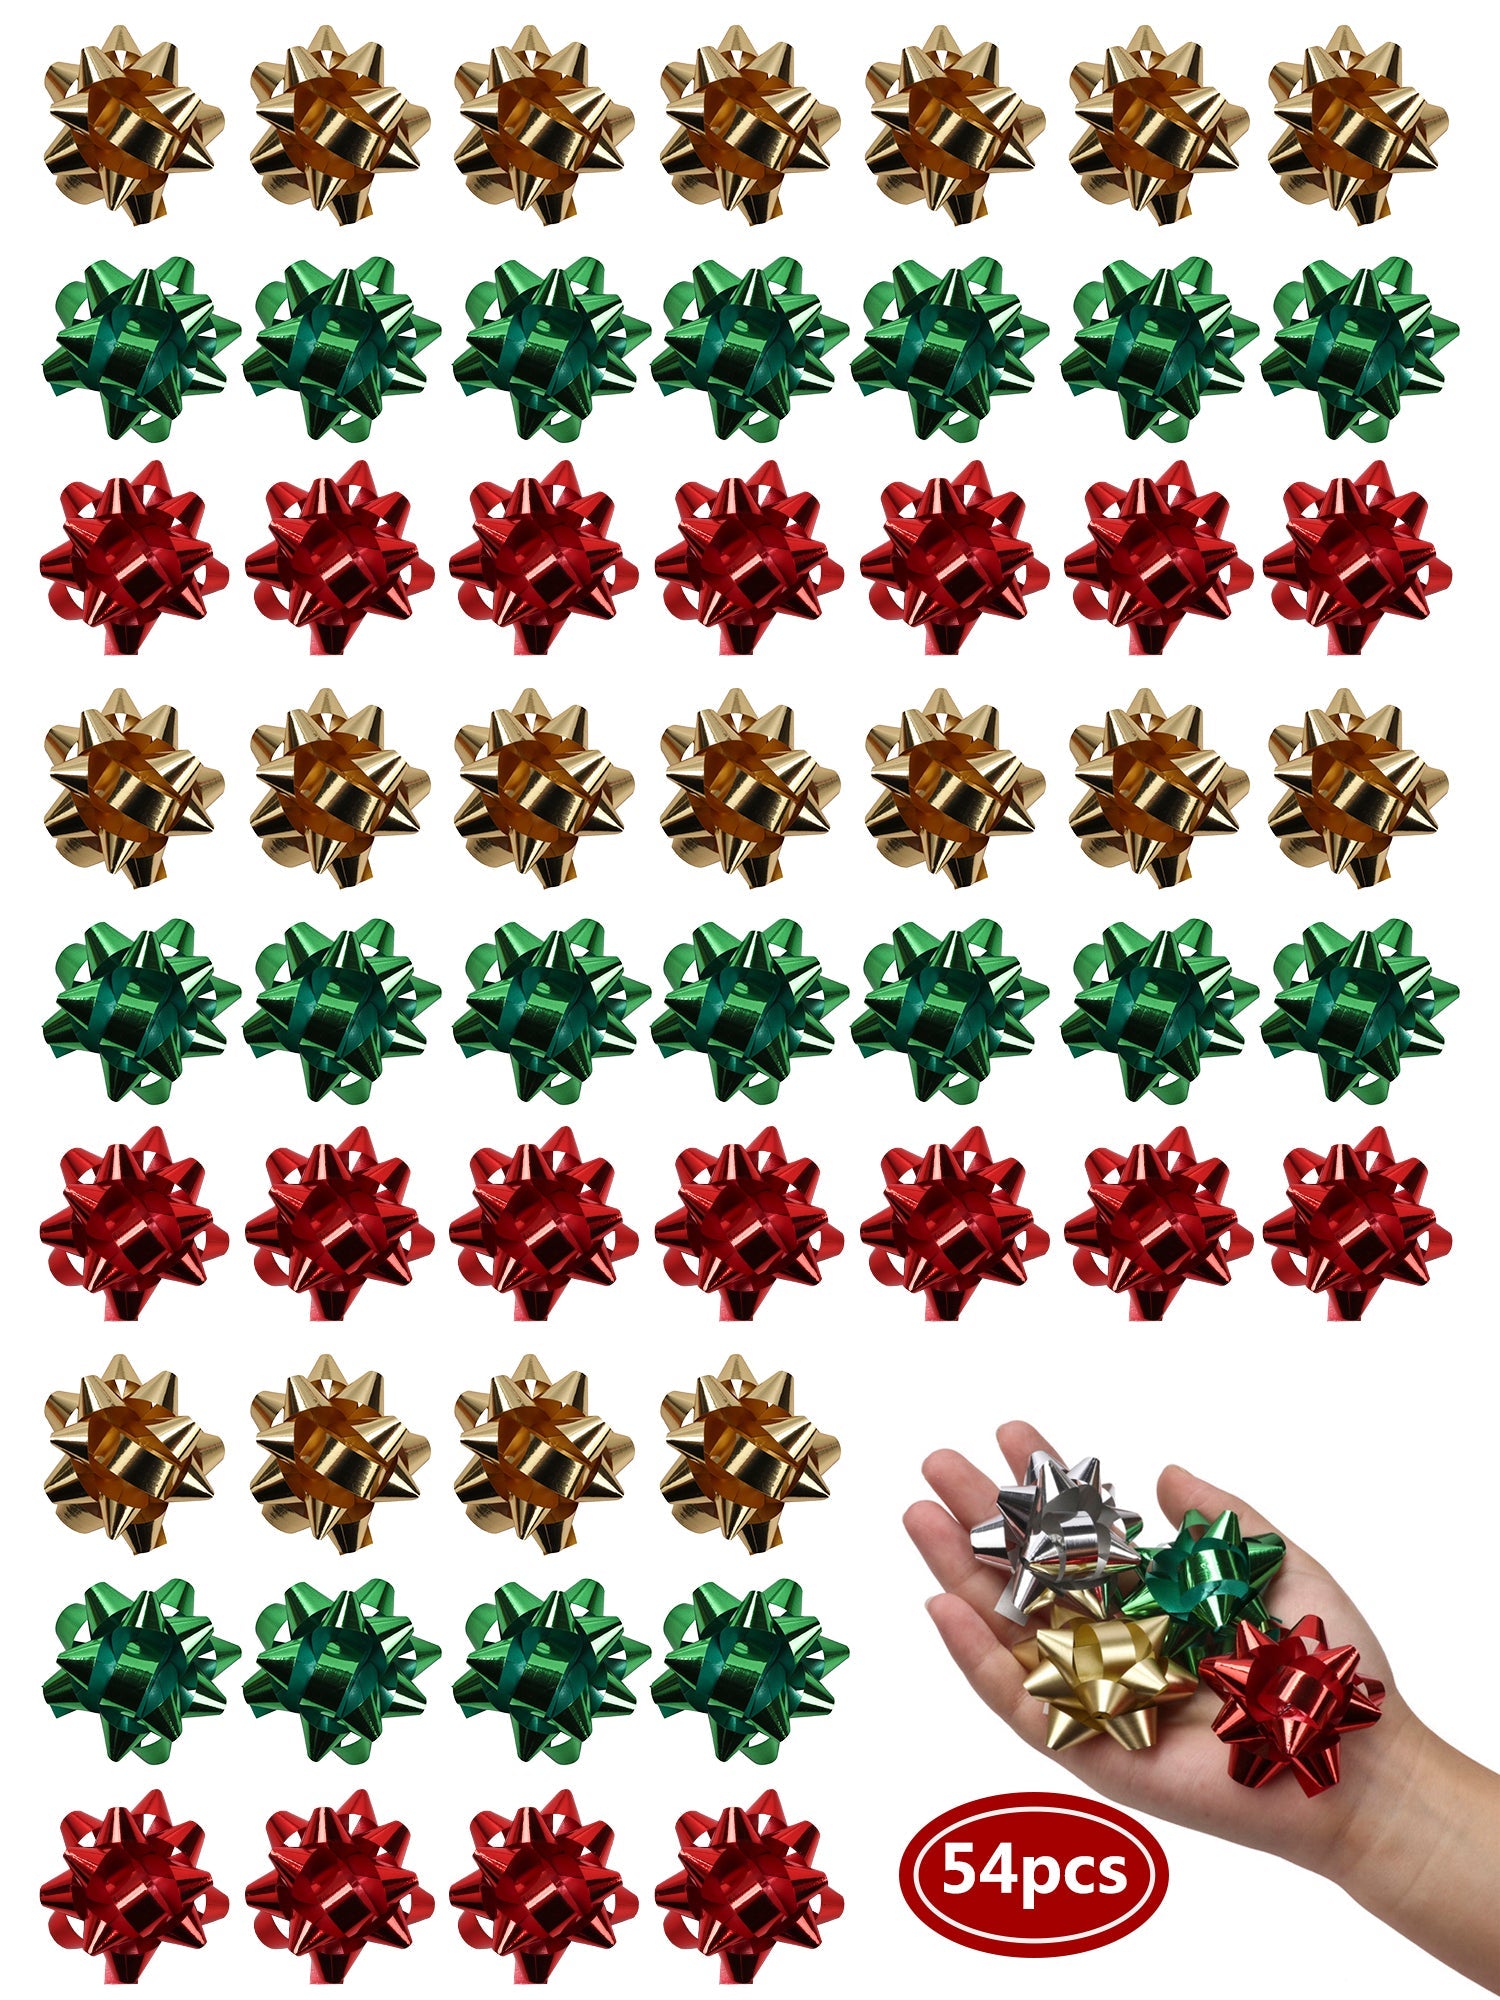 2" Christmas Star Gift Bow Bundle - Green/Red/Gold - 54pcs